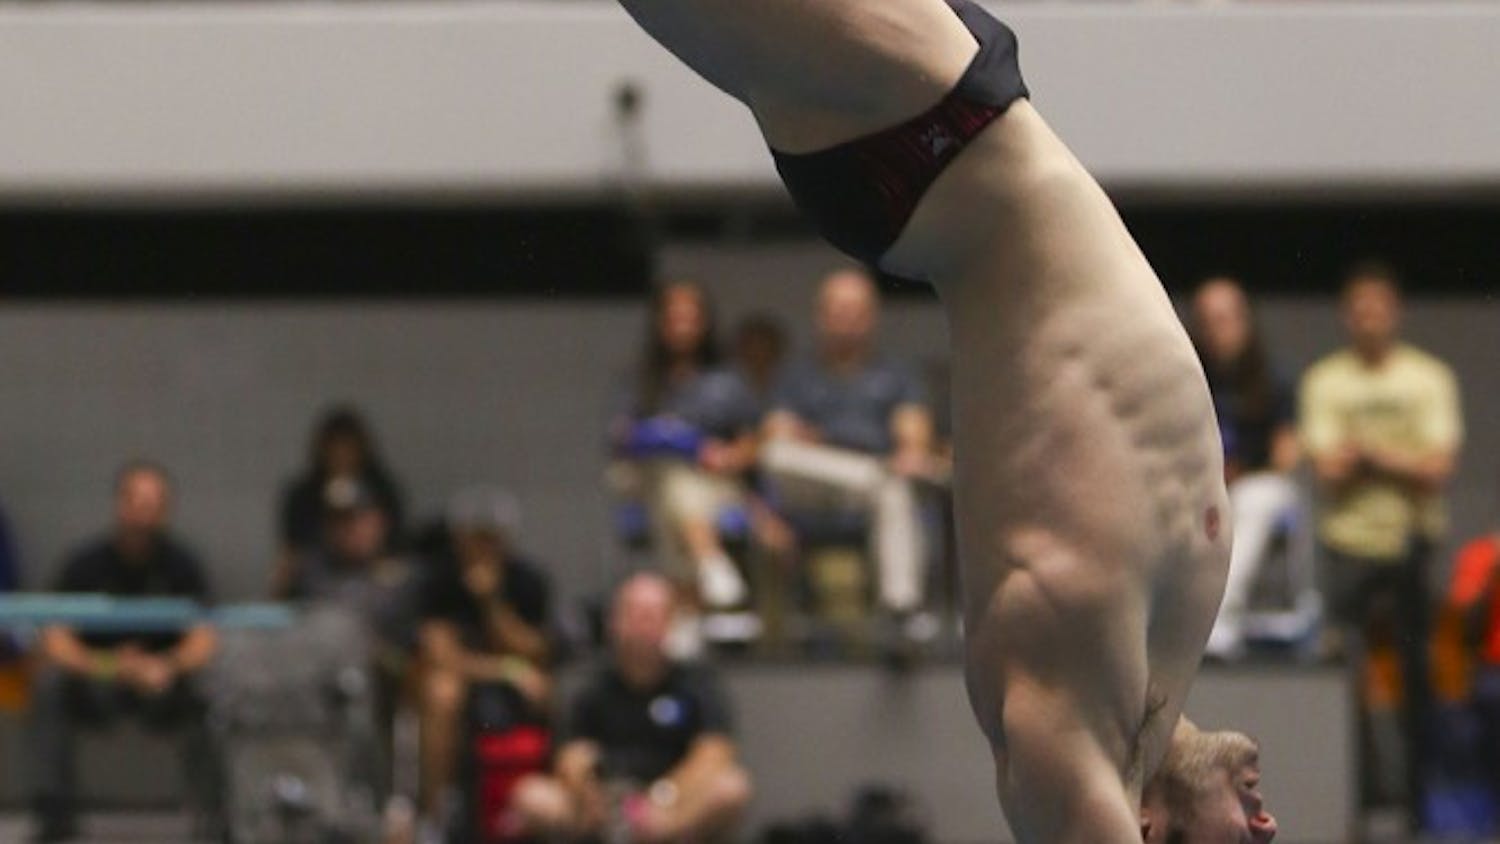 Junior Michael Hixon performs a back 2.5 somersault pike at the IUPUI natatorium on Friday, March 24, 2017 at the NCAA Swimming and Diving Championships. Hixon placed 5th in the men's 1-meter dive and 6th in the 3-meter synchro at the 2017 FINA World Championships in Budapest, Hungary.